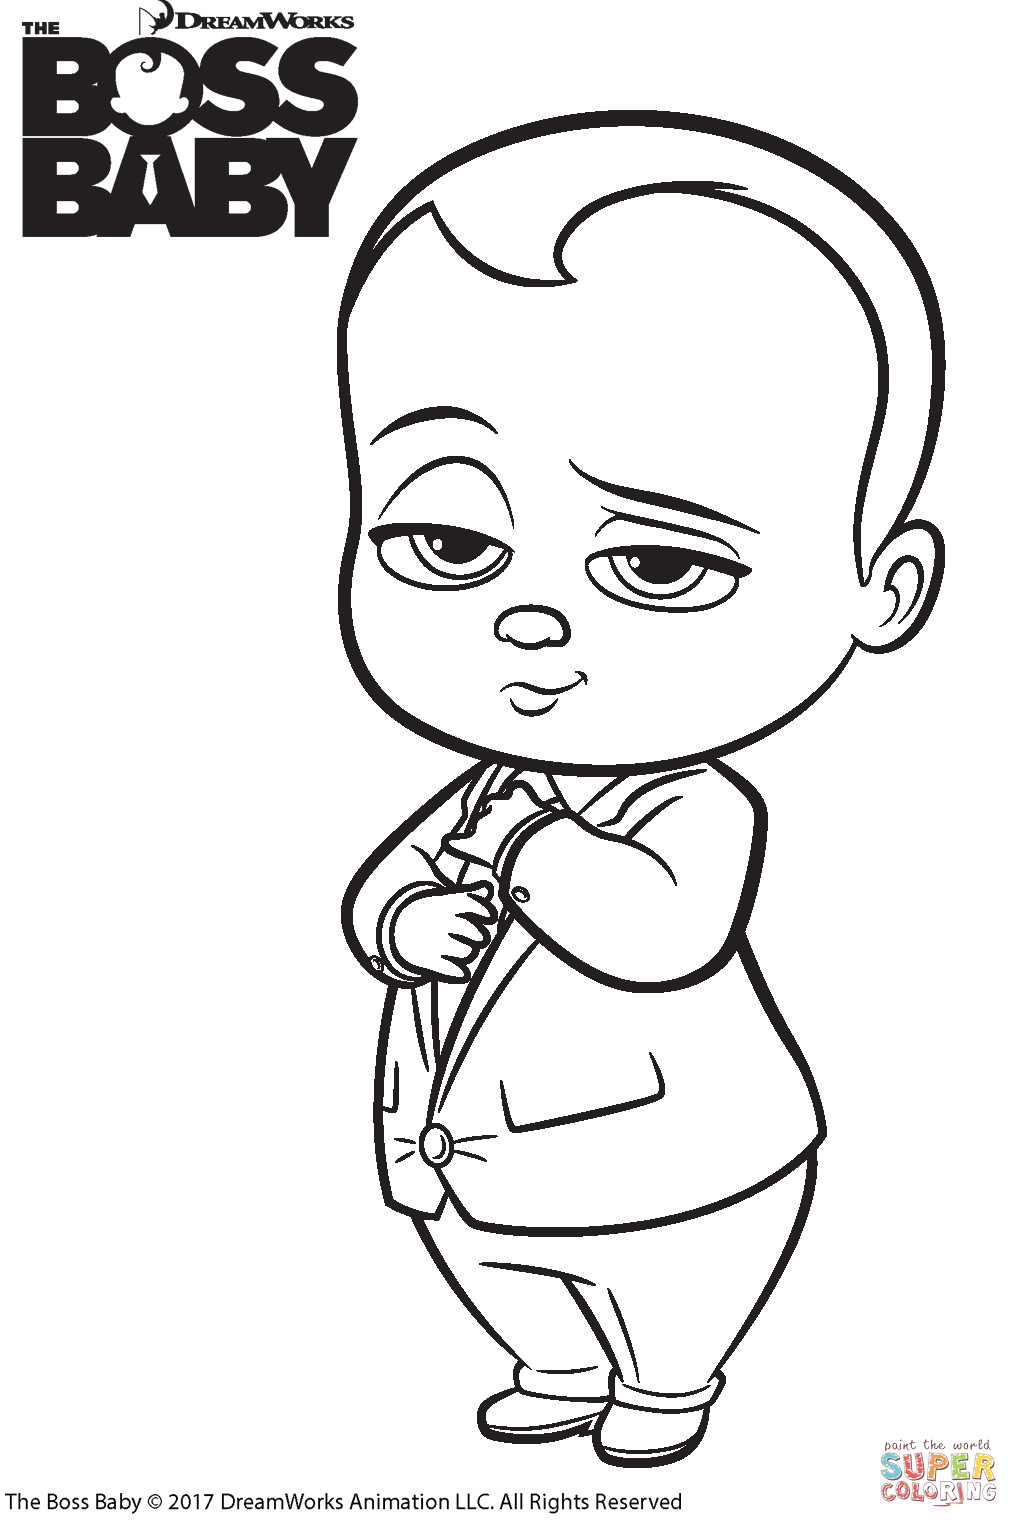 Boss Baby Coloring Page
 The Boss Baby coloring page